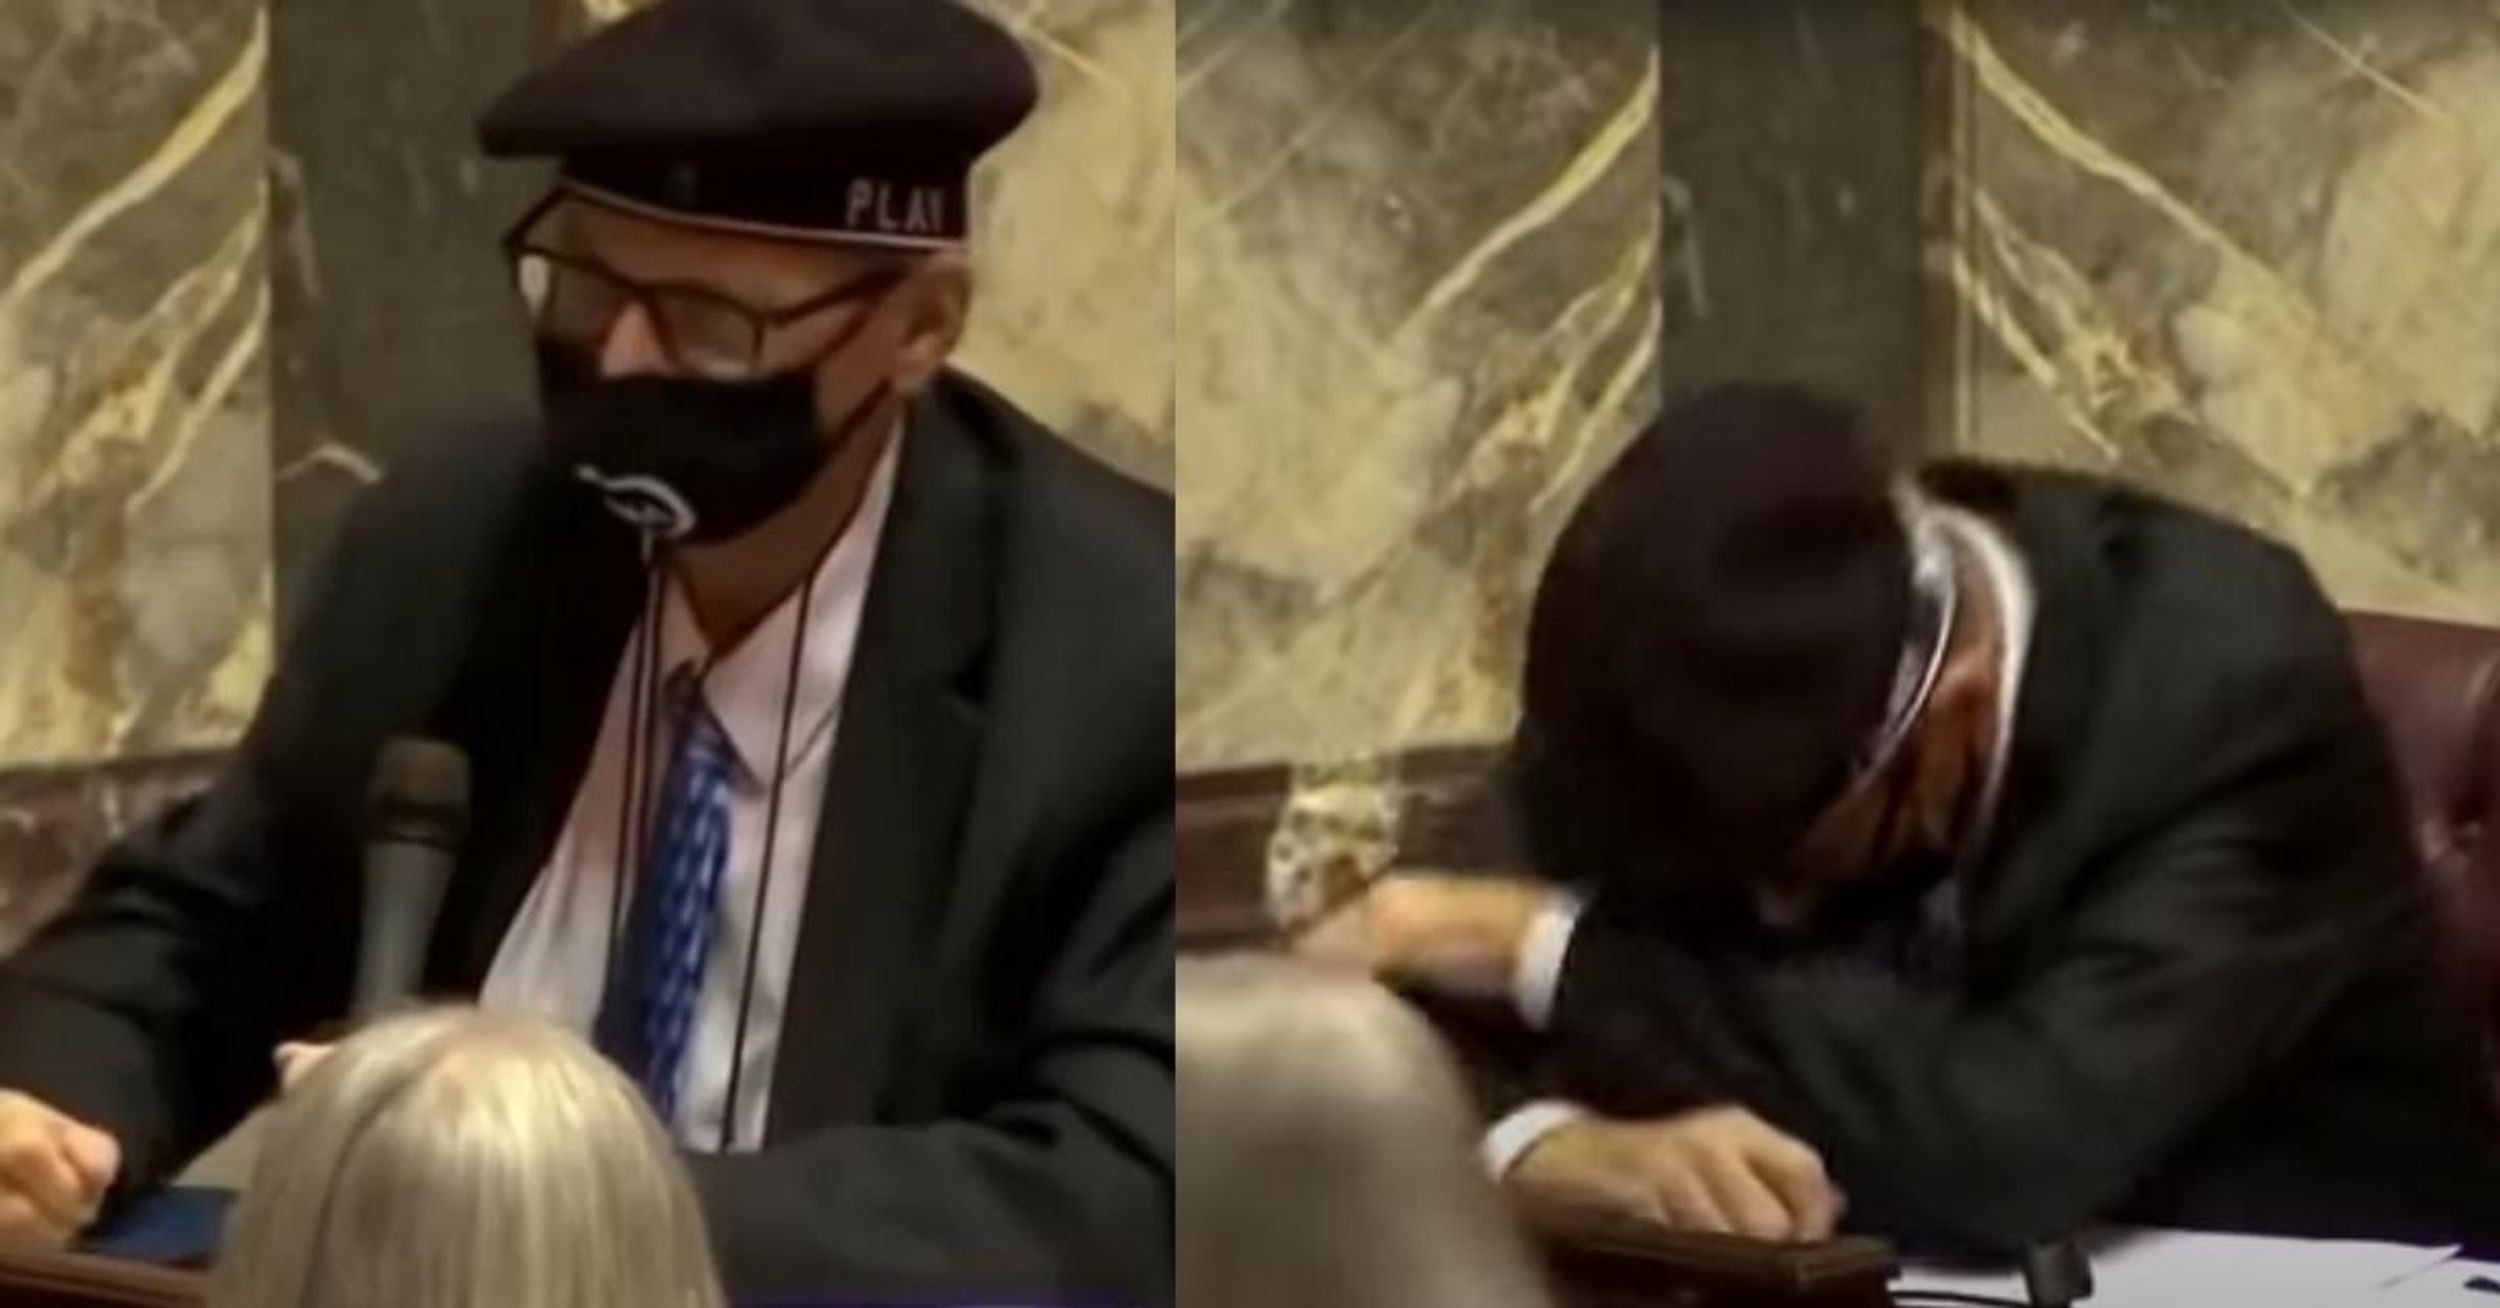 Terminally-Ill Elector Breaks Down In Tears After Casting Emotional Vote For Biden And Harris